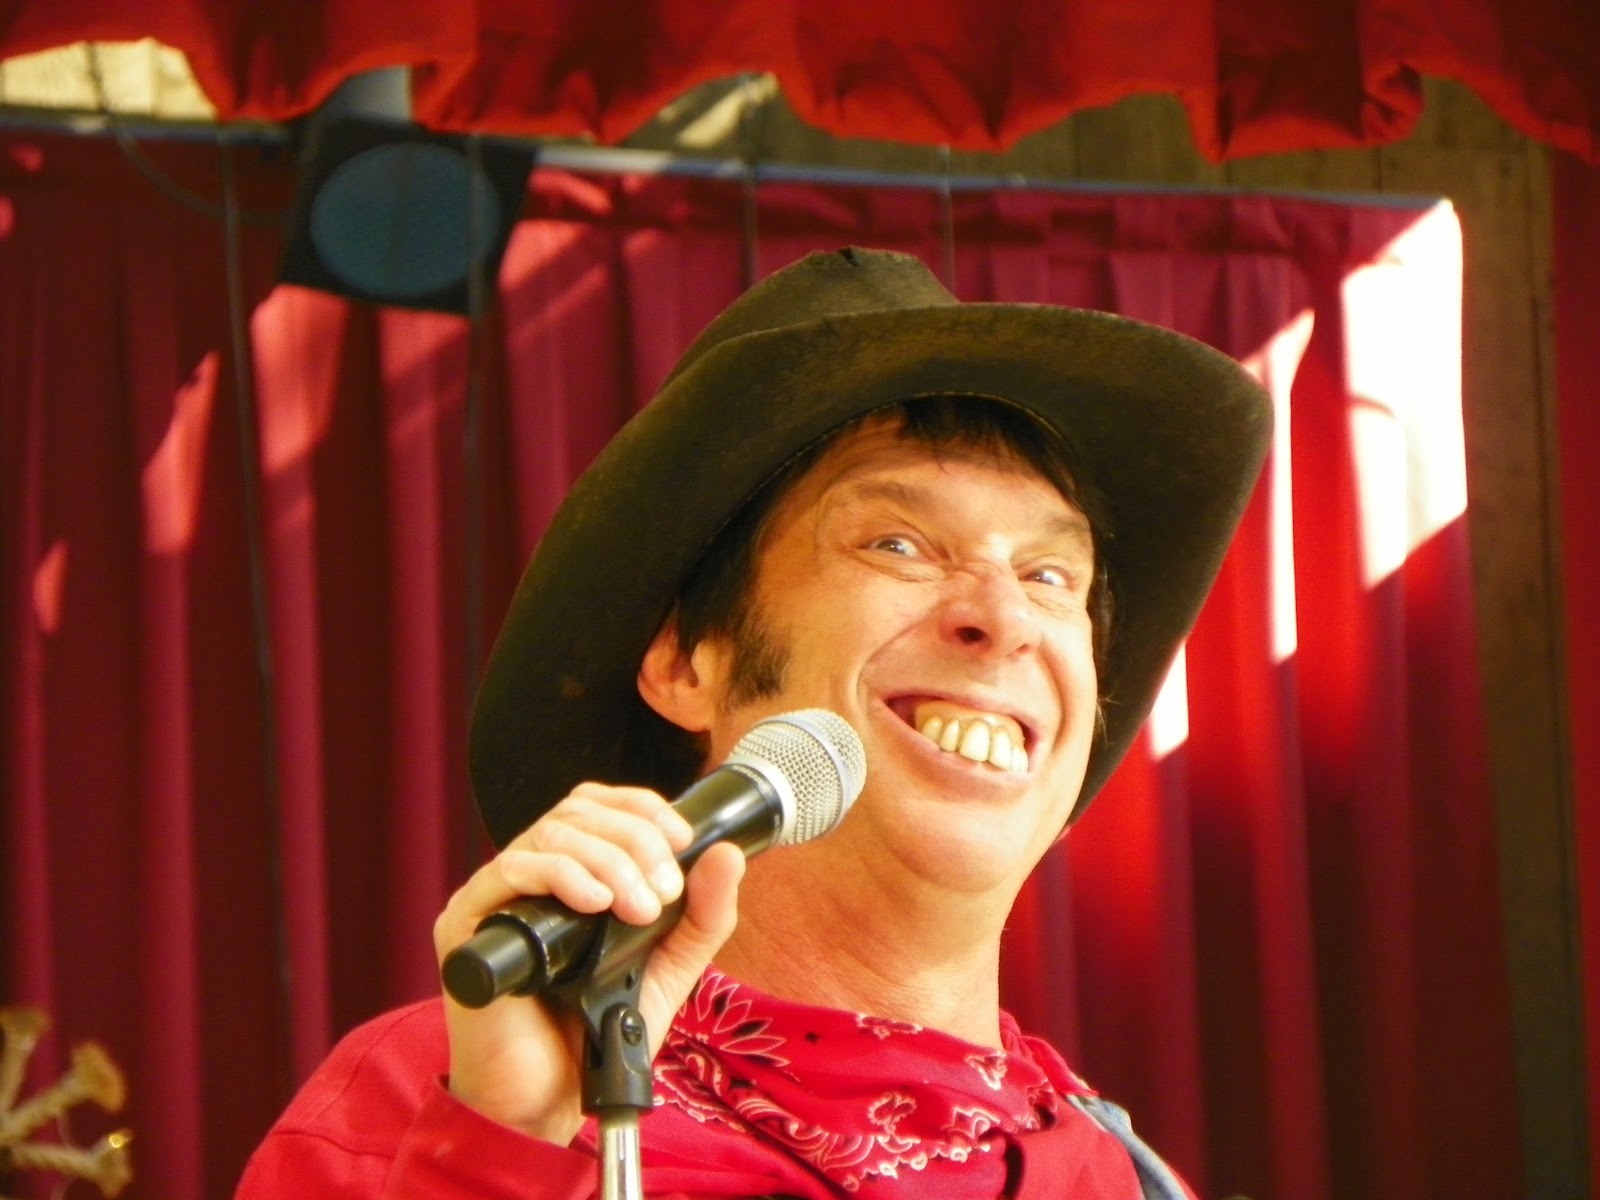 Pixie Pranks and Disney Fun: Billy Hill and the Holiday Hillbillies!